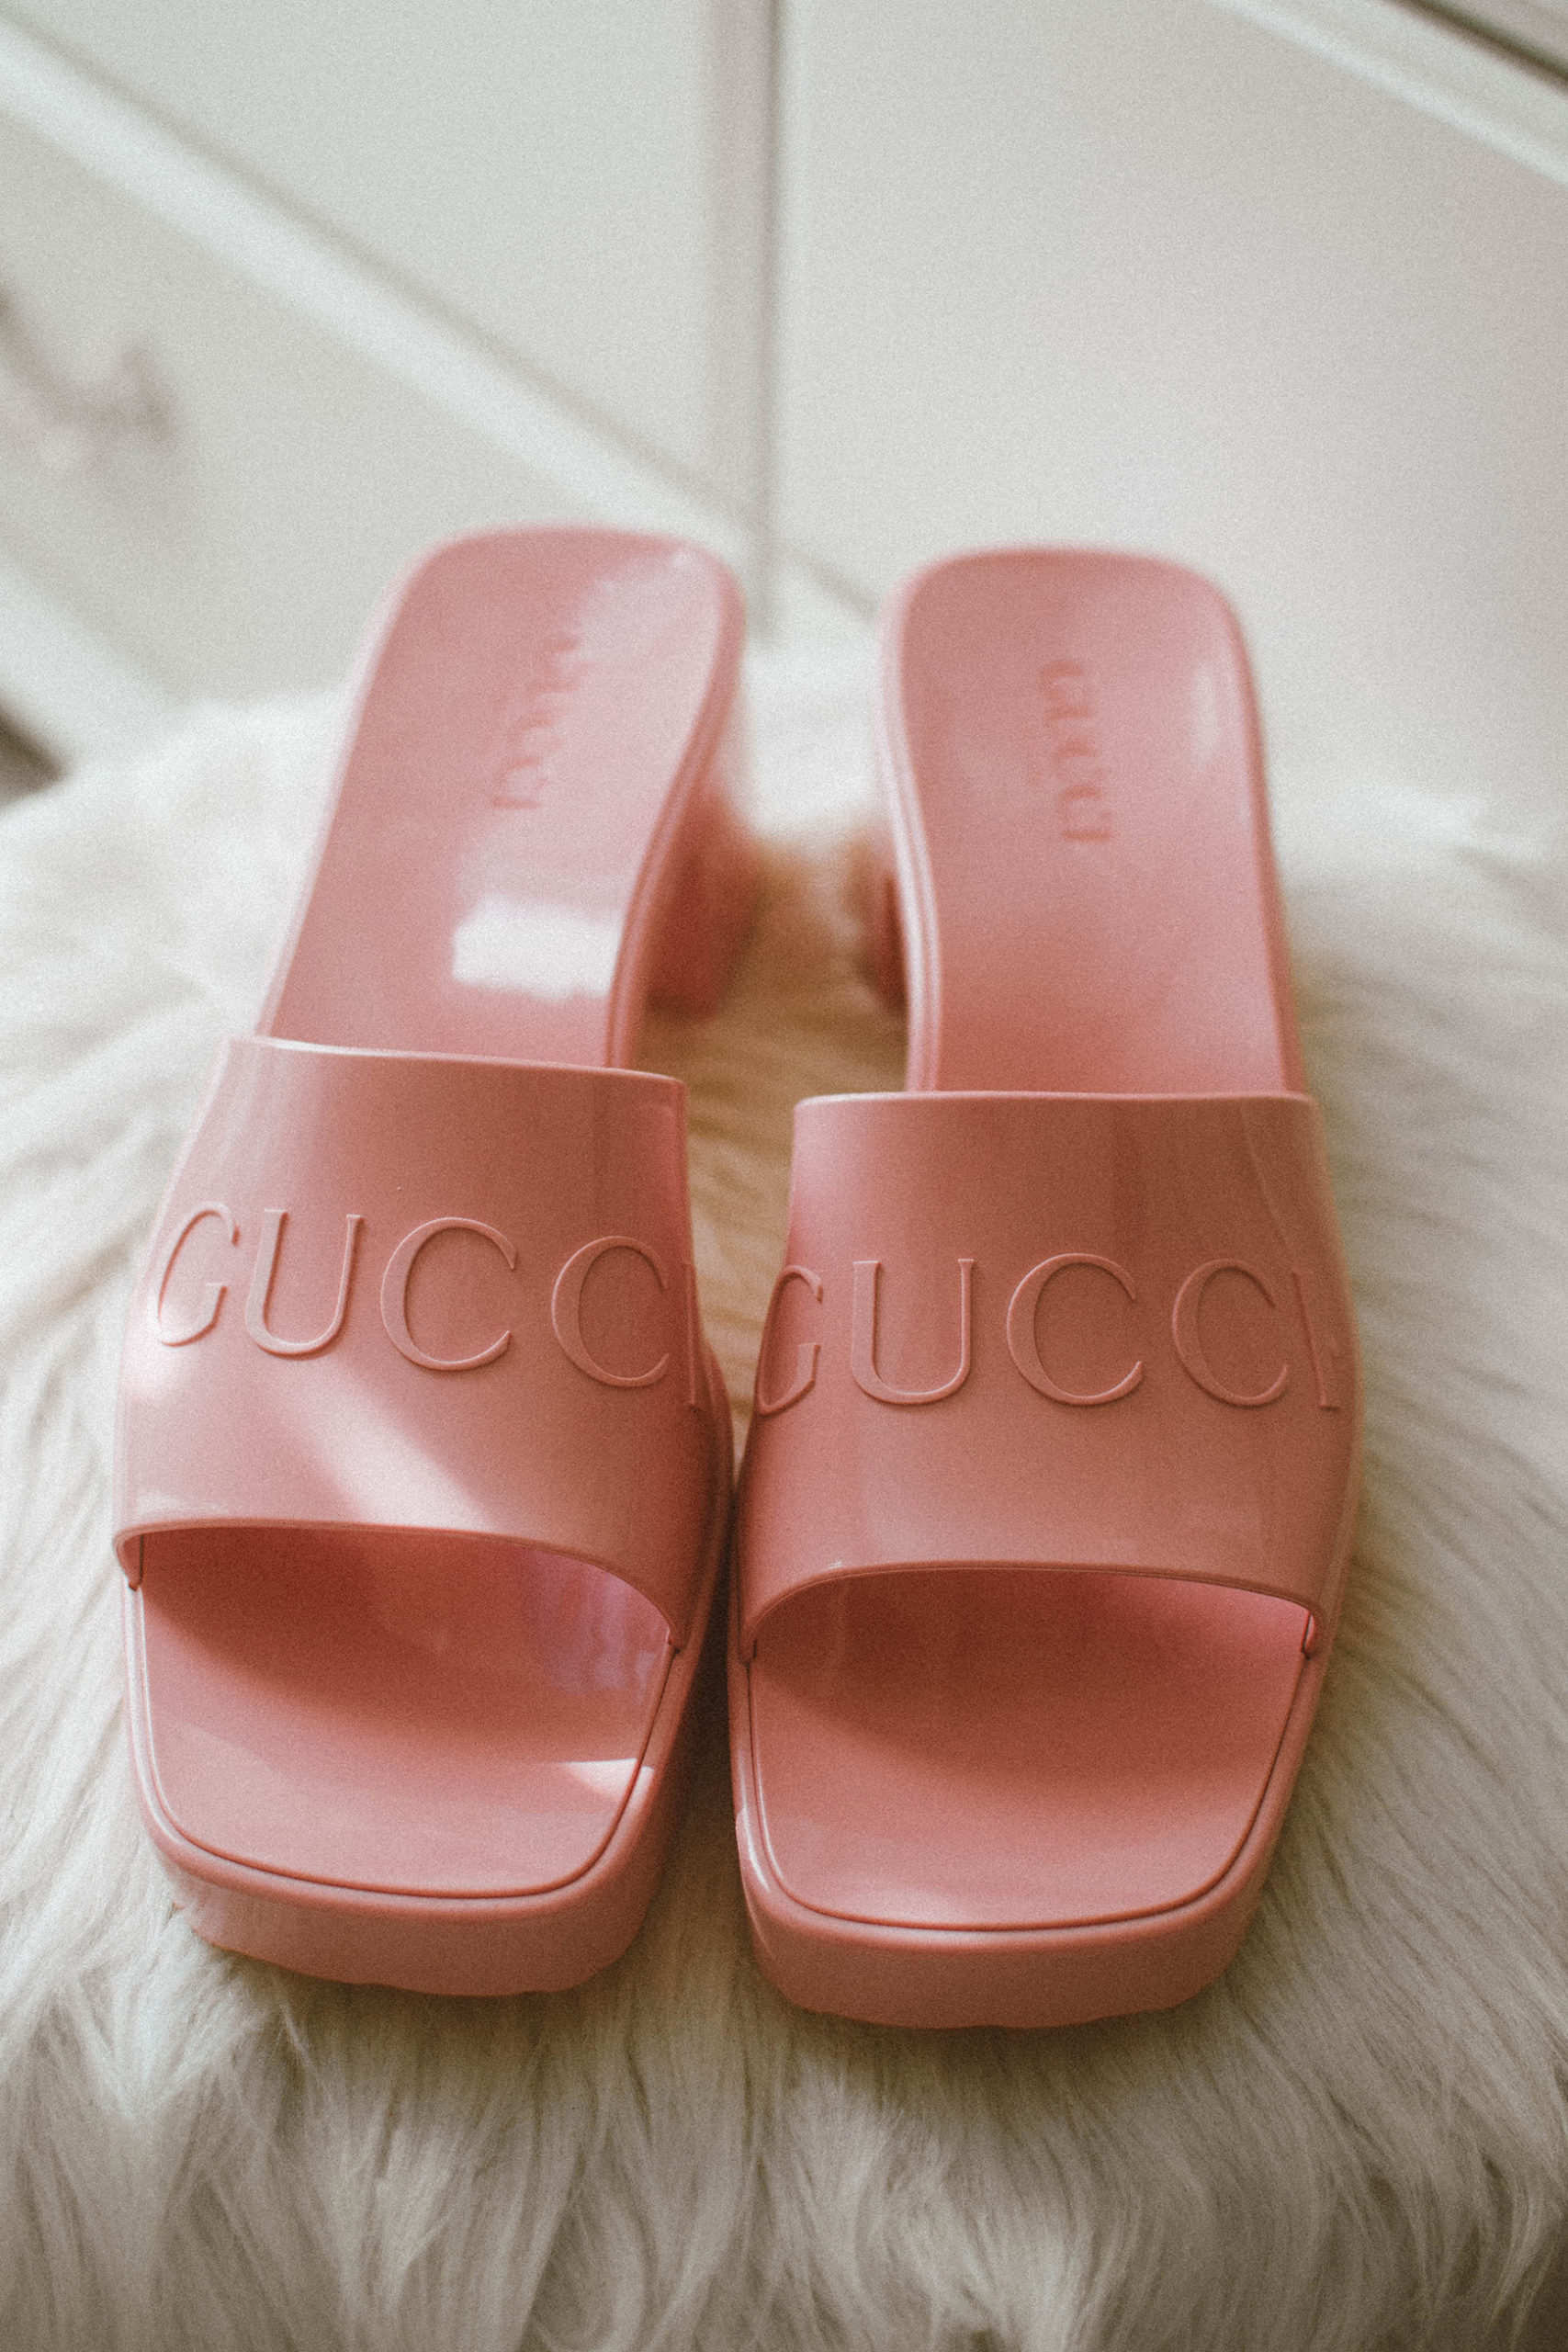 sympathie Jurassic Park Sobriquette Gucci Pink Women's Rubber Slide Sandal Review - From Nubiana, With Love